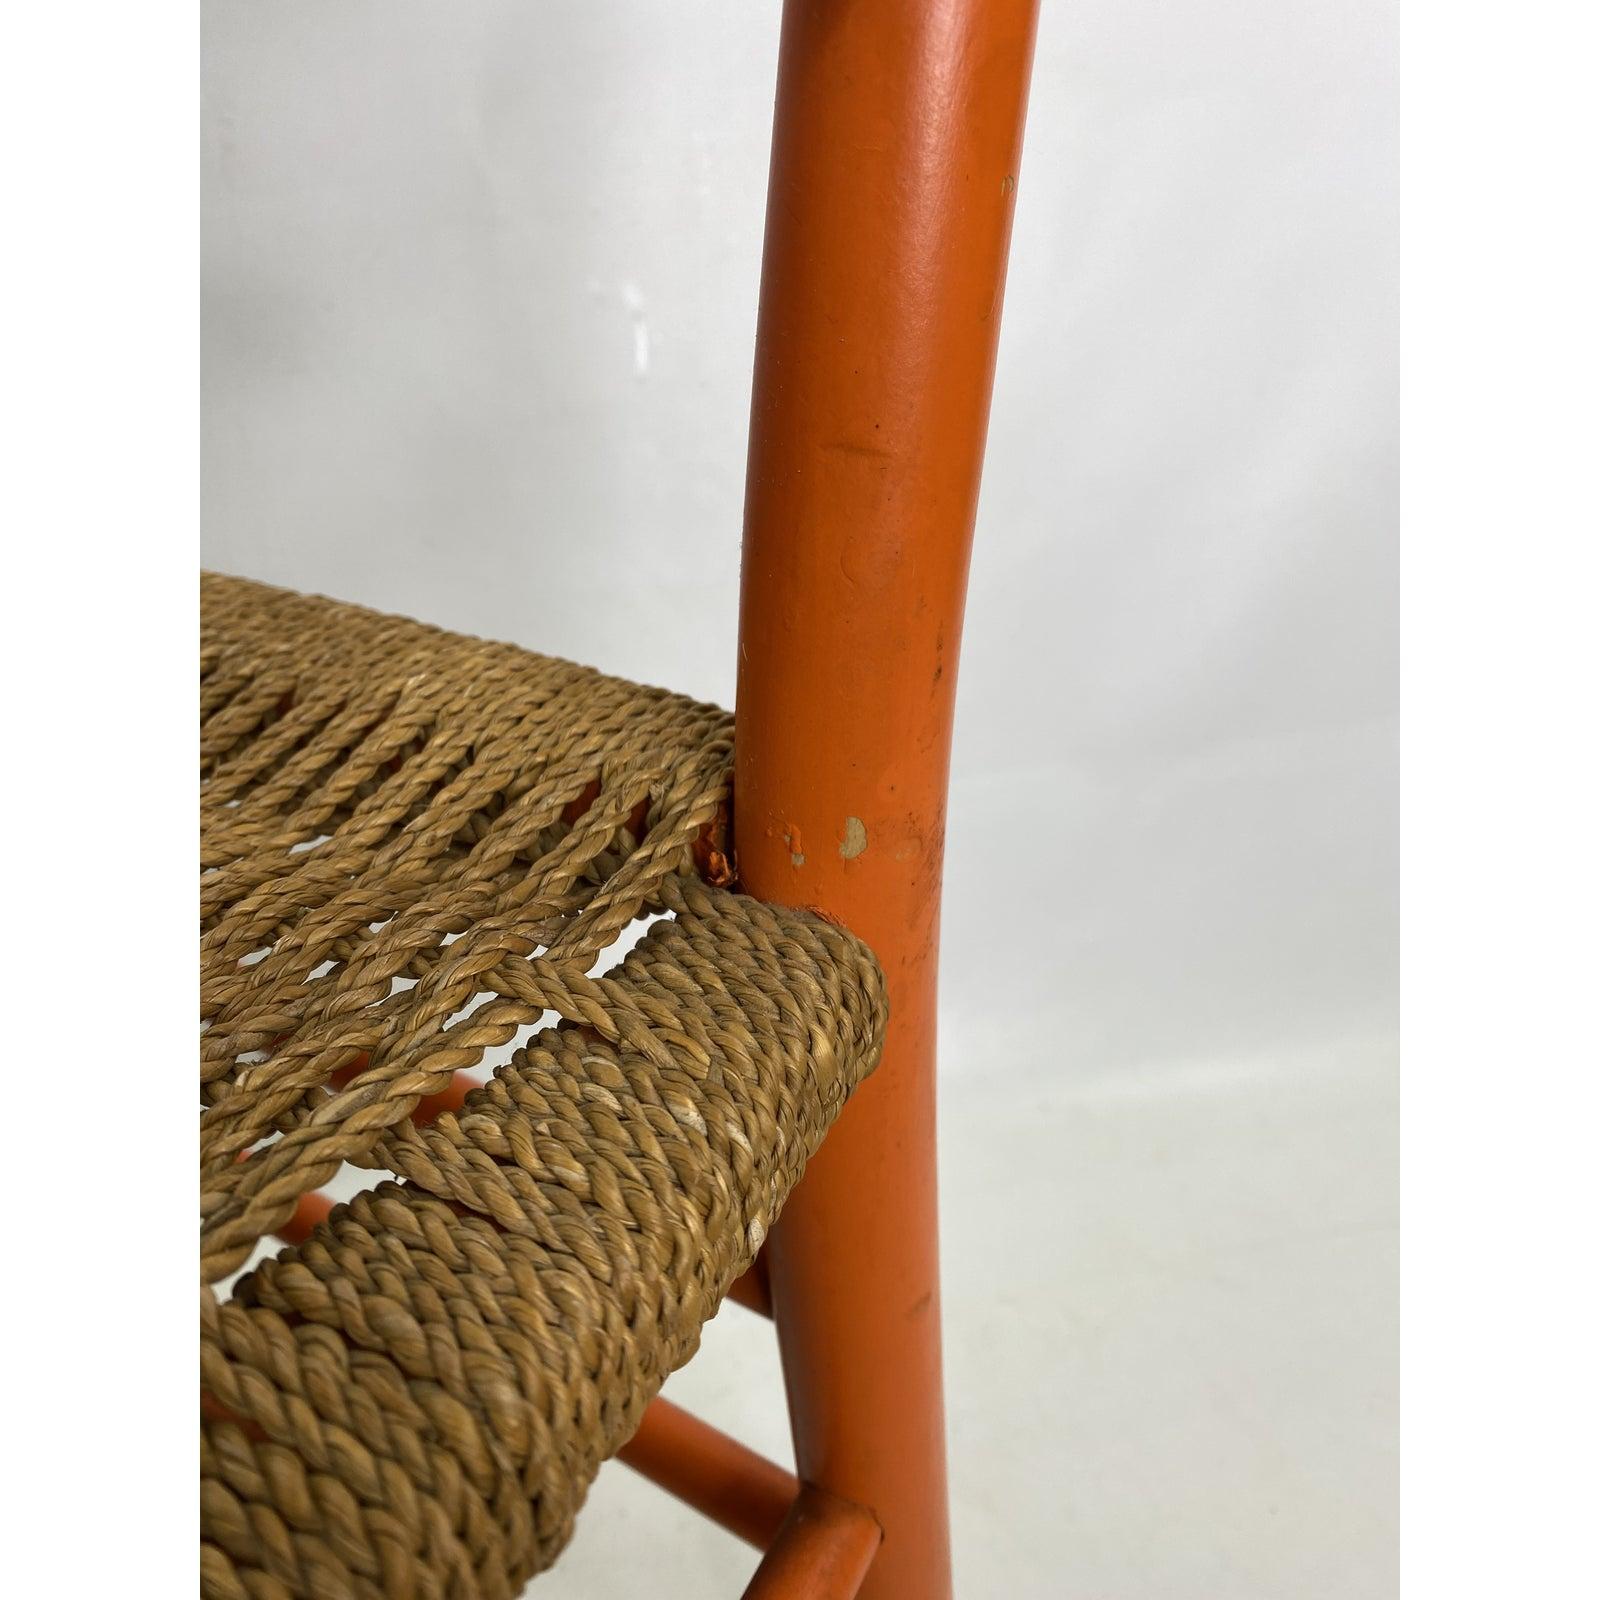 Vintage Gio Ponti Style Orange Chair, Made in Italy For Sale 1